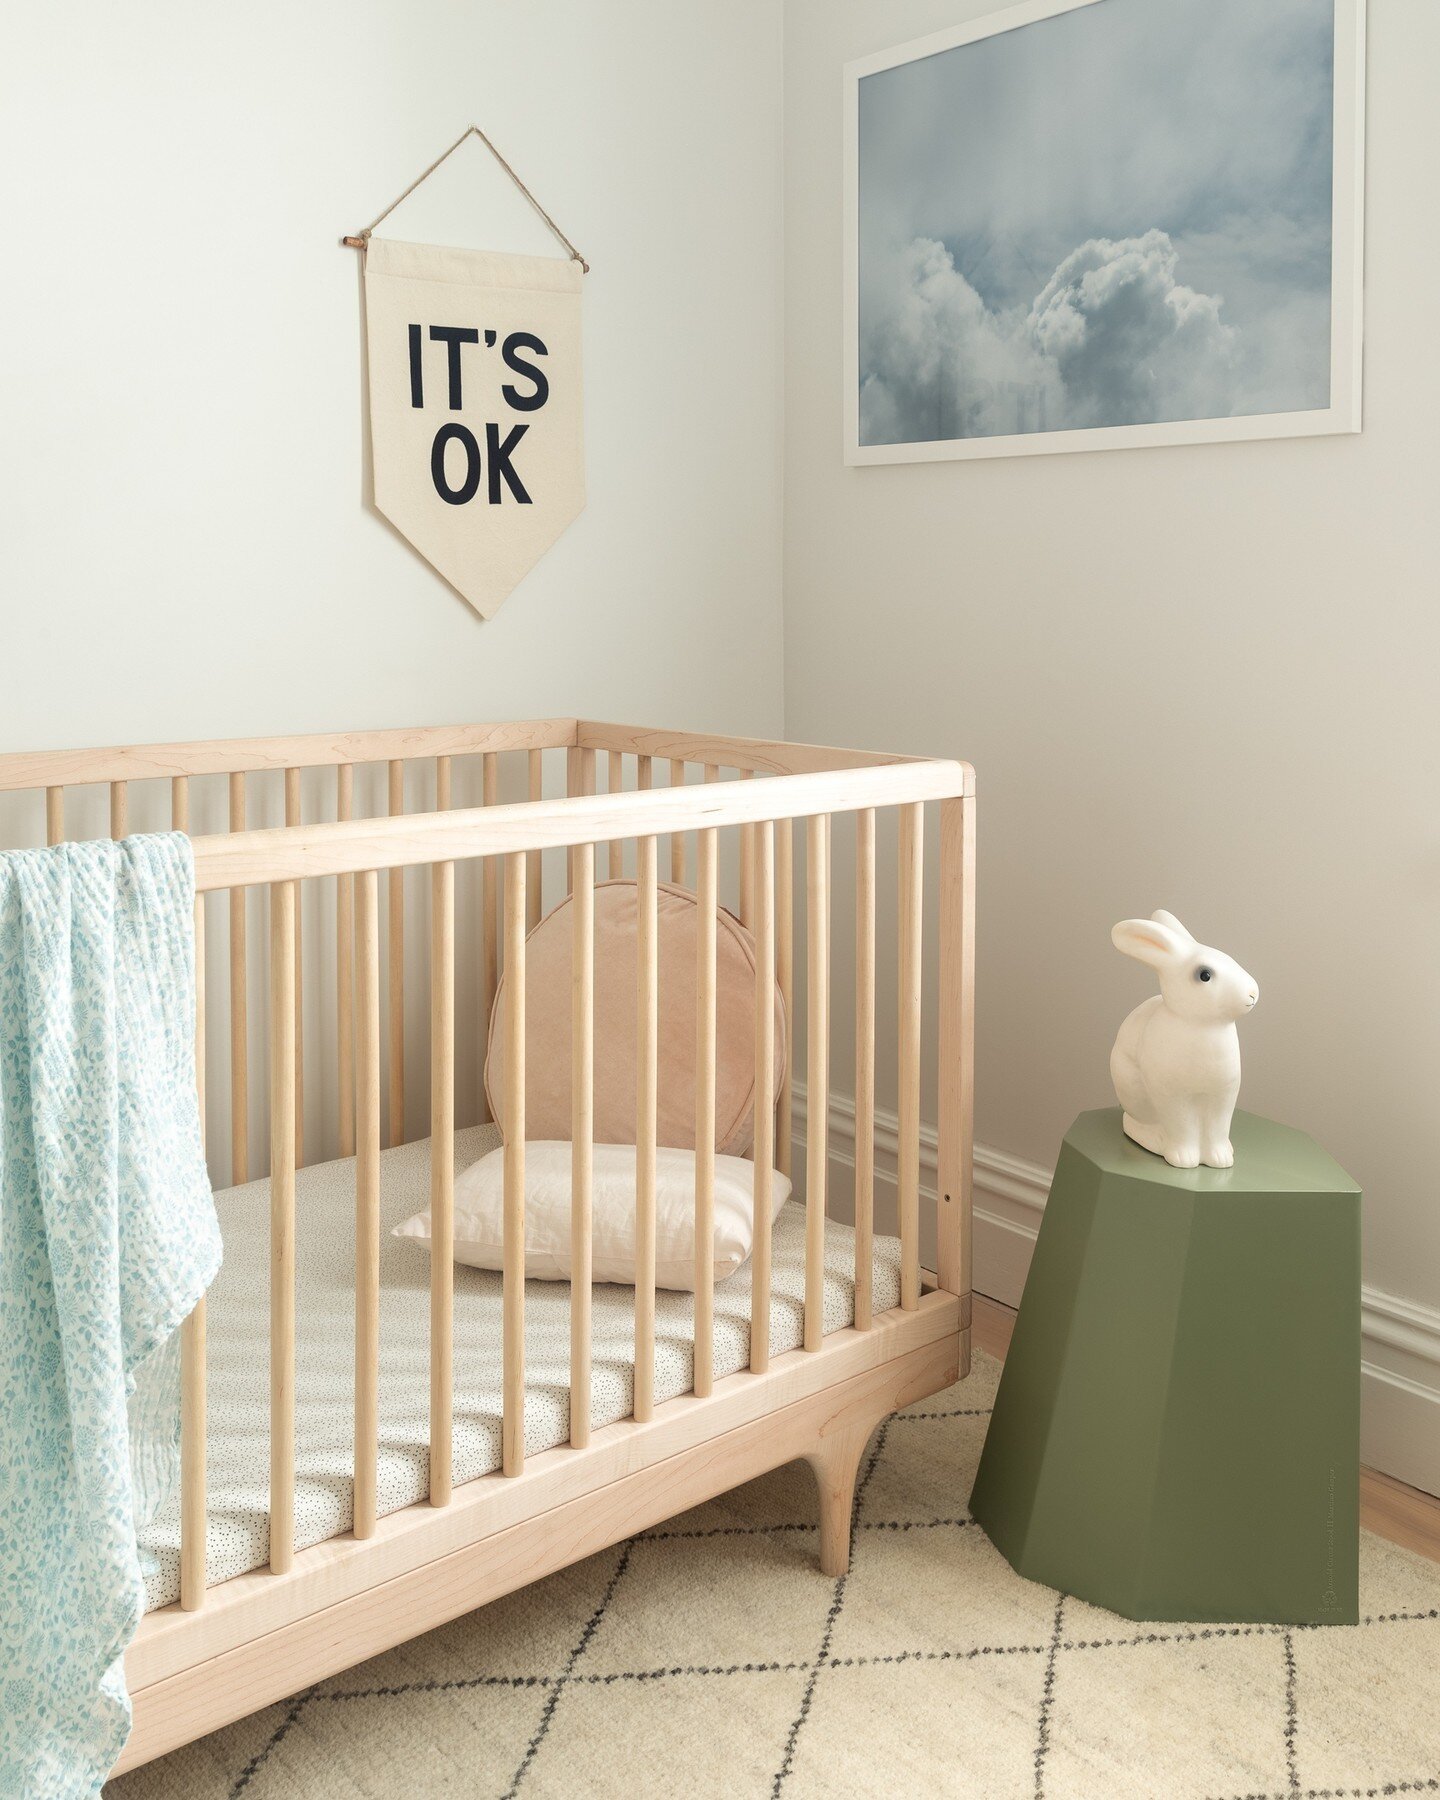 Pouring over nursery pics for inspiration and planning the space was one of the most exciting parts of preparing for our little one in 2020. Maybe as it offers a chance for a fresh palette special to that space and you're imagining your tiny babe in 